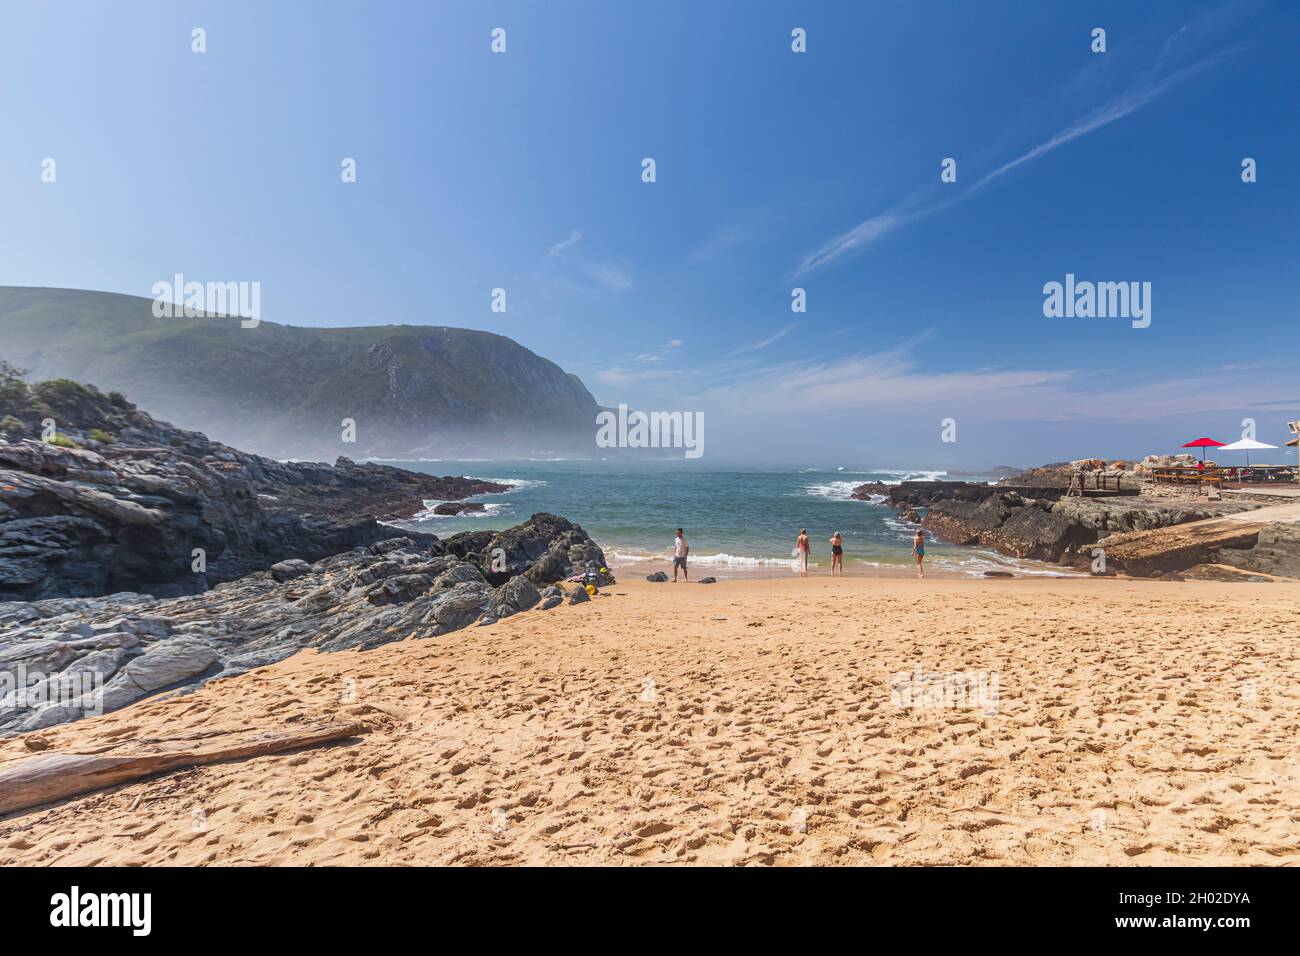 The view of fine sandy beach with rock outcrops and misty sea at Storms River Mouth in Tsitsikamma National Park off the Garden Route, South Africa. Stock Photo